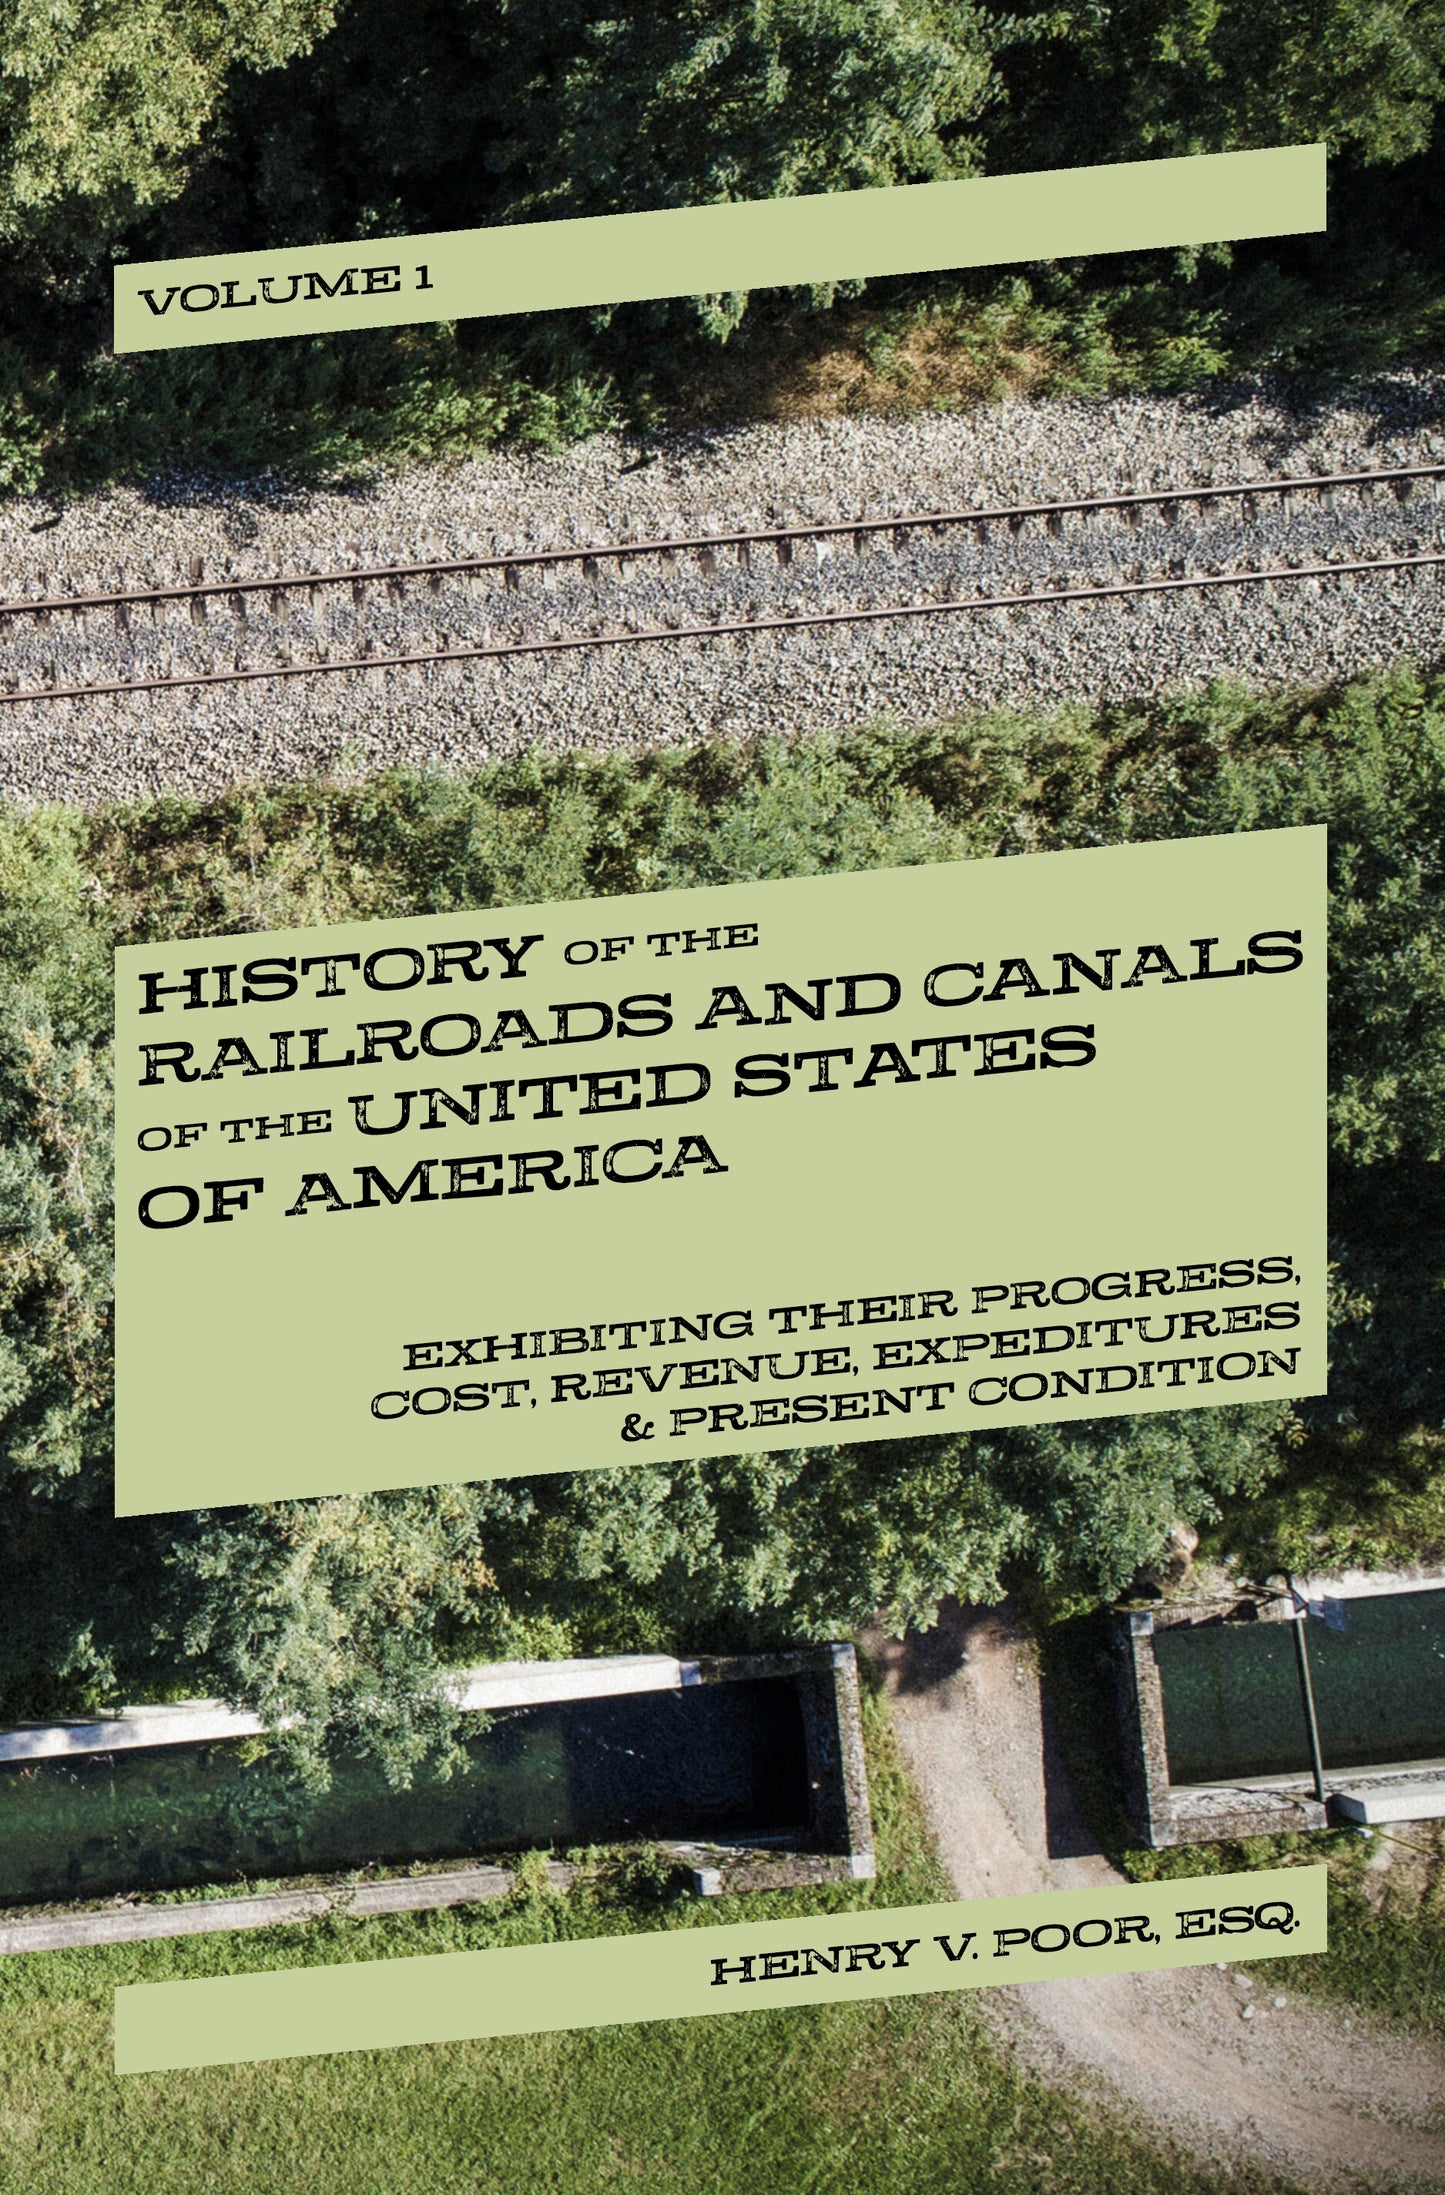 History of the Railroads and Canals of the United States of America Volume 1